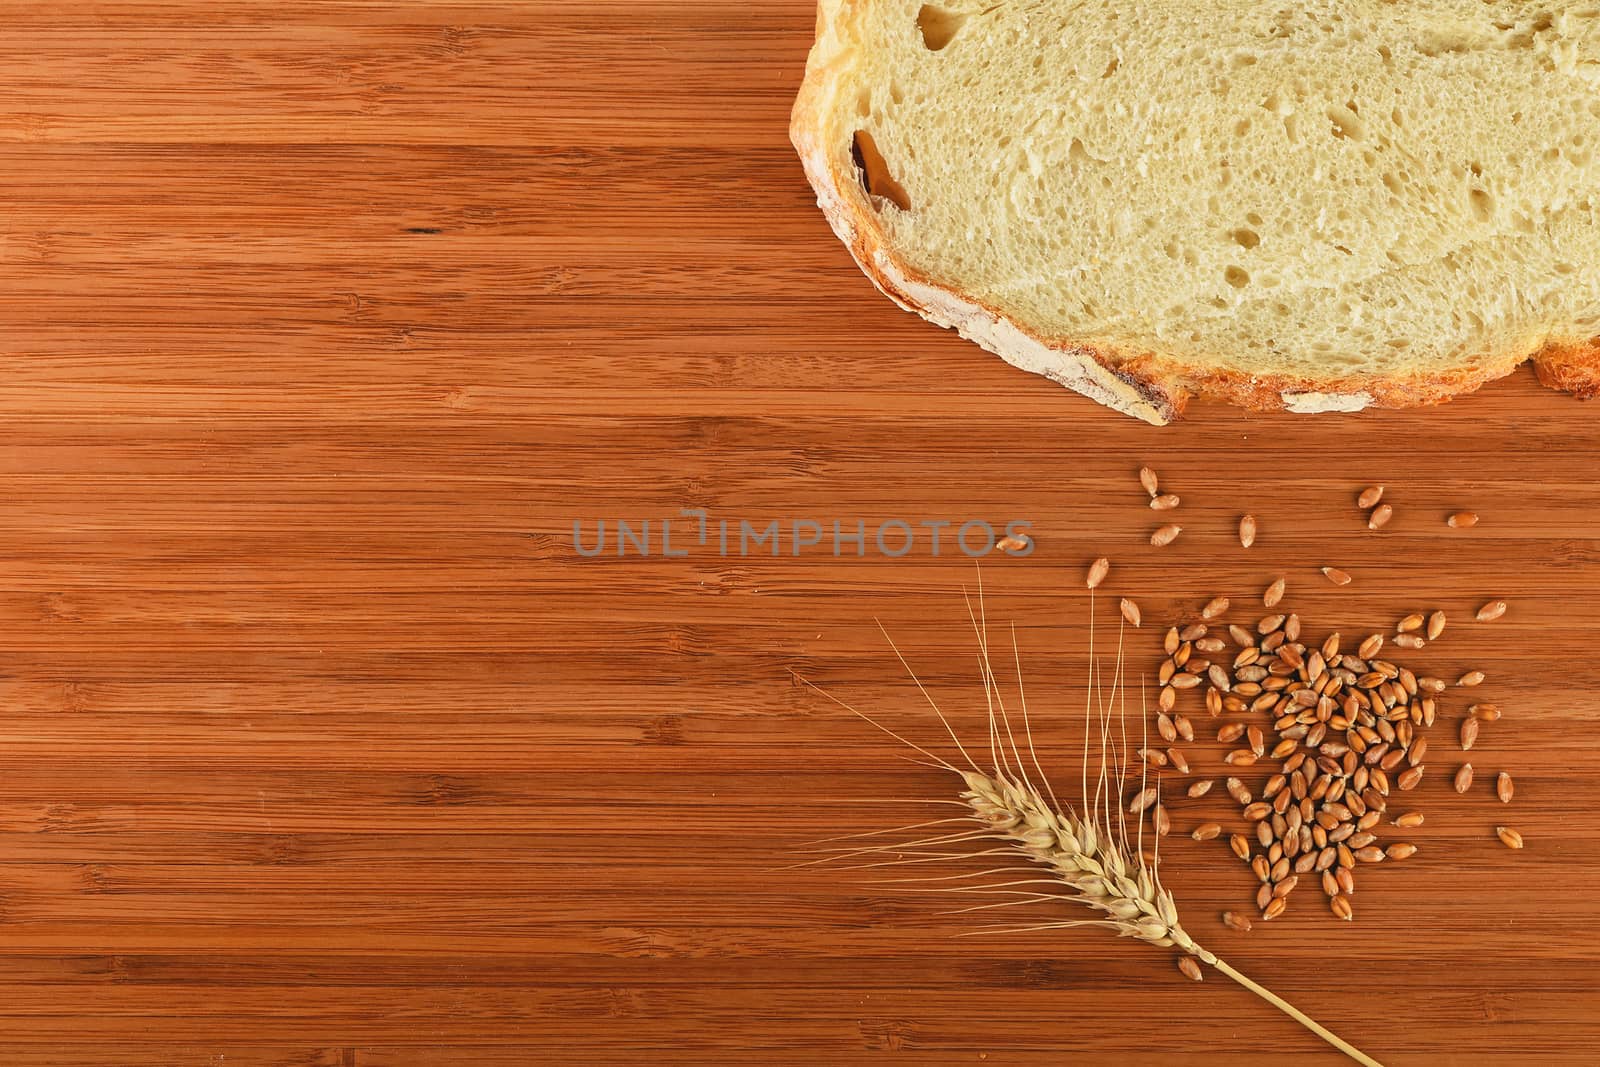 Cutting board with wheat ear, grains and slice of bread by BreakingTheWalls